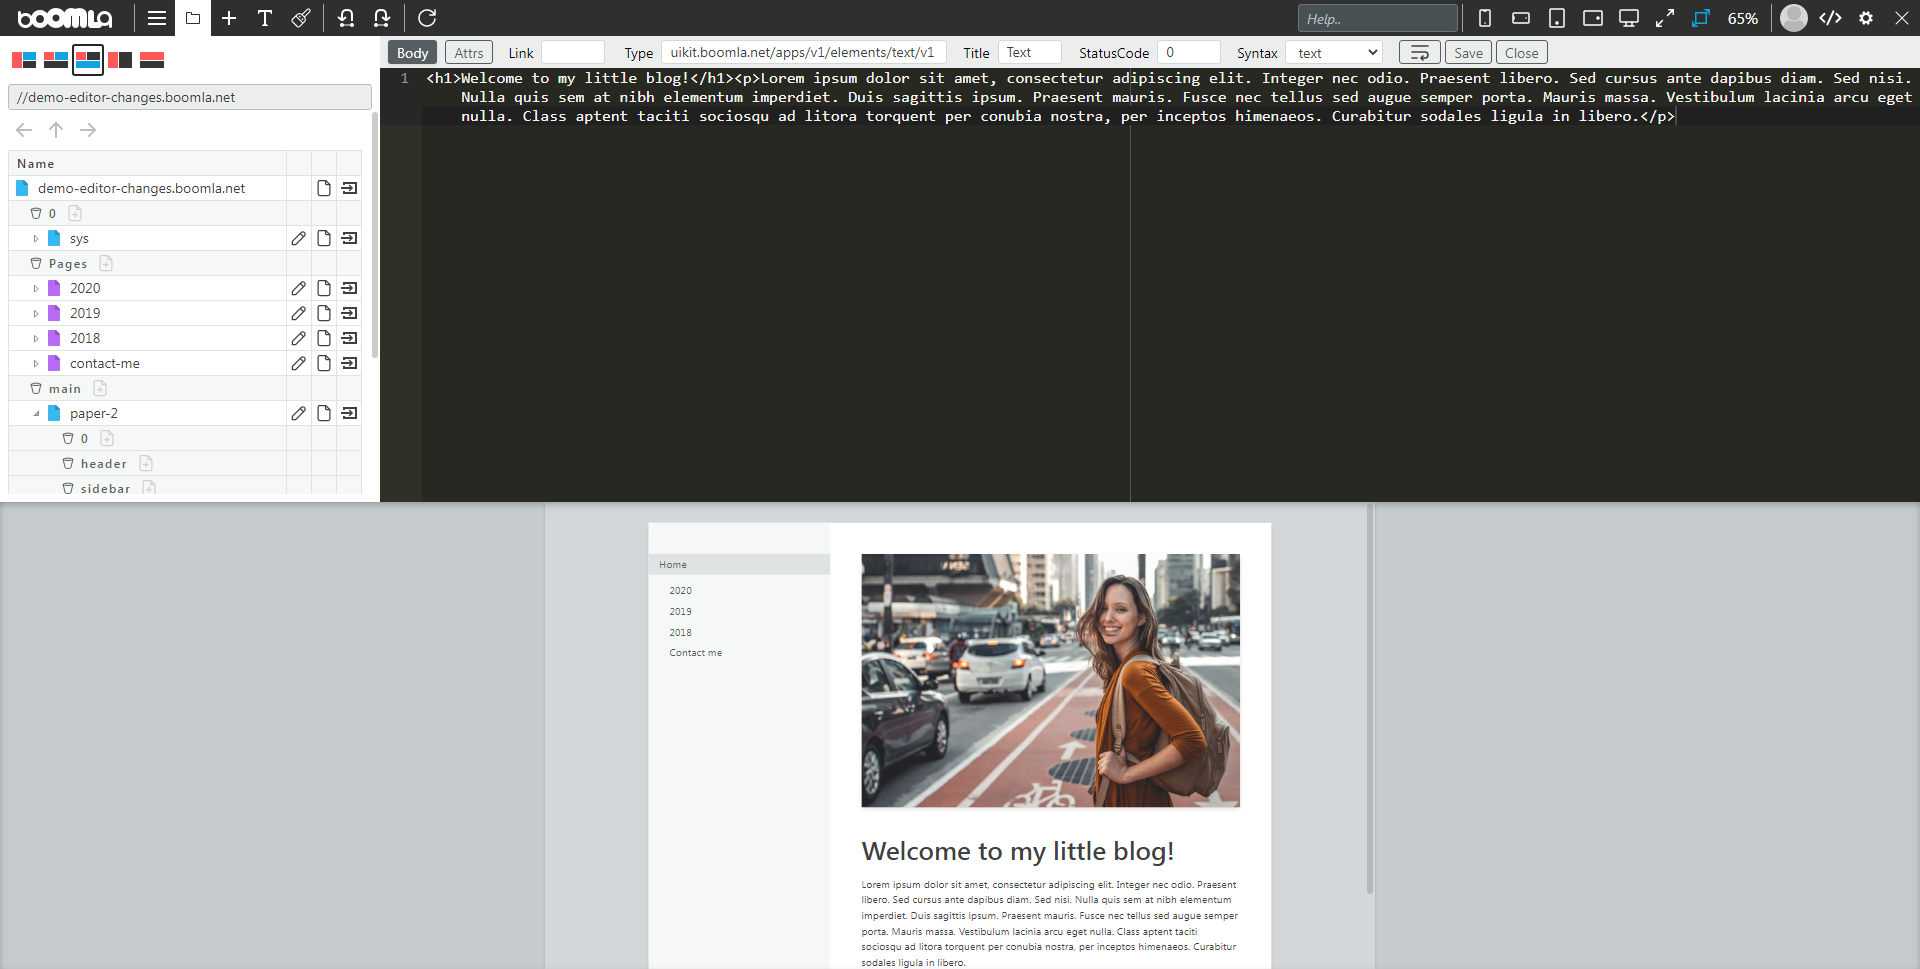 new-object-editor-with-code-editor-layout-3.png